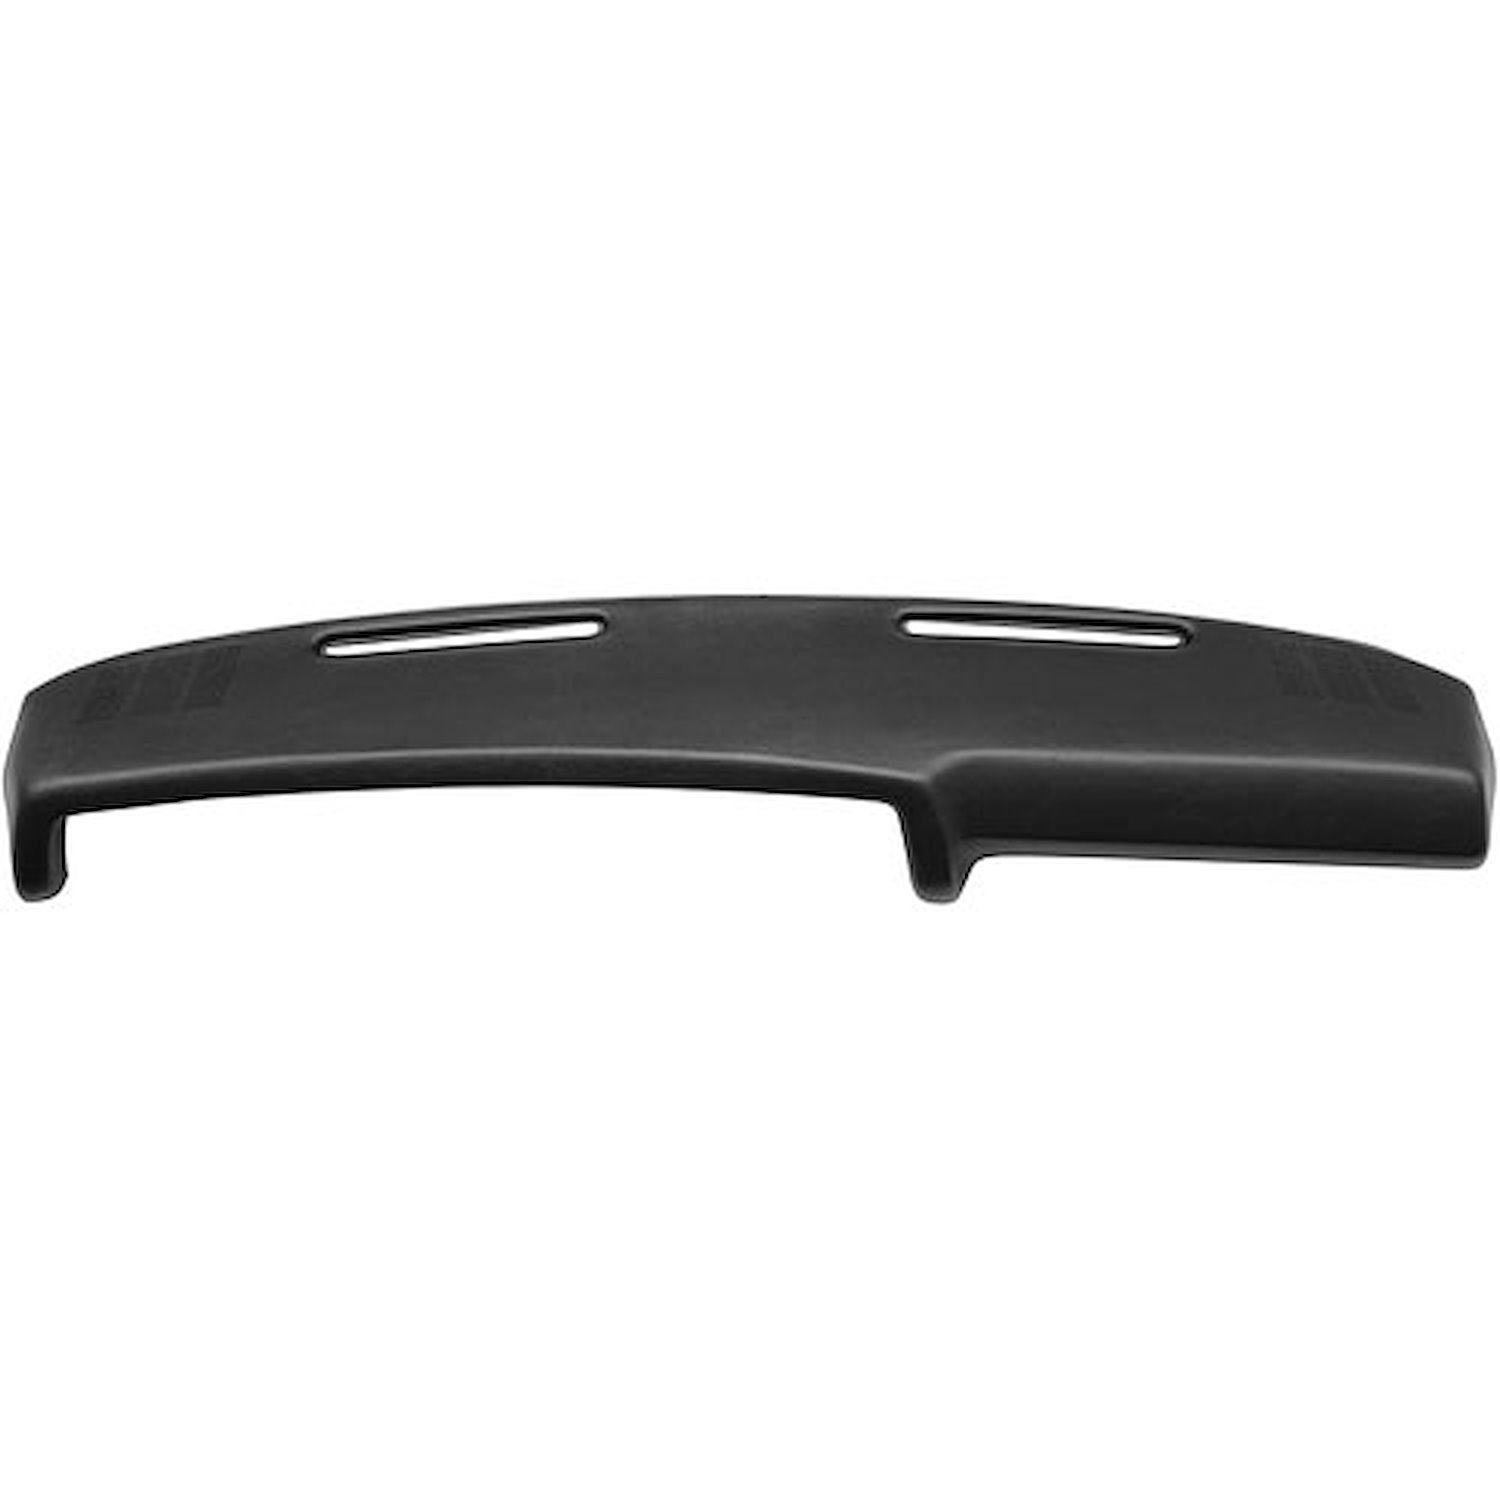 Injection-Molded Urethane Foam Dash Pad 1970-72 Chevy Chevelle/El